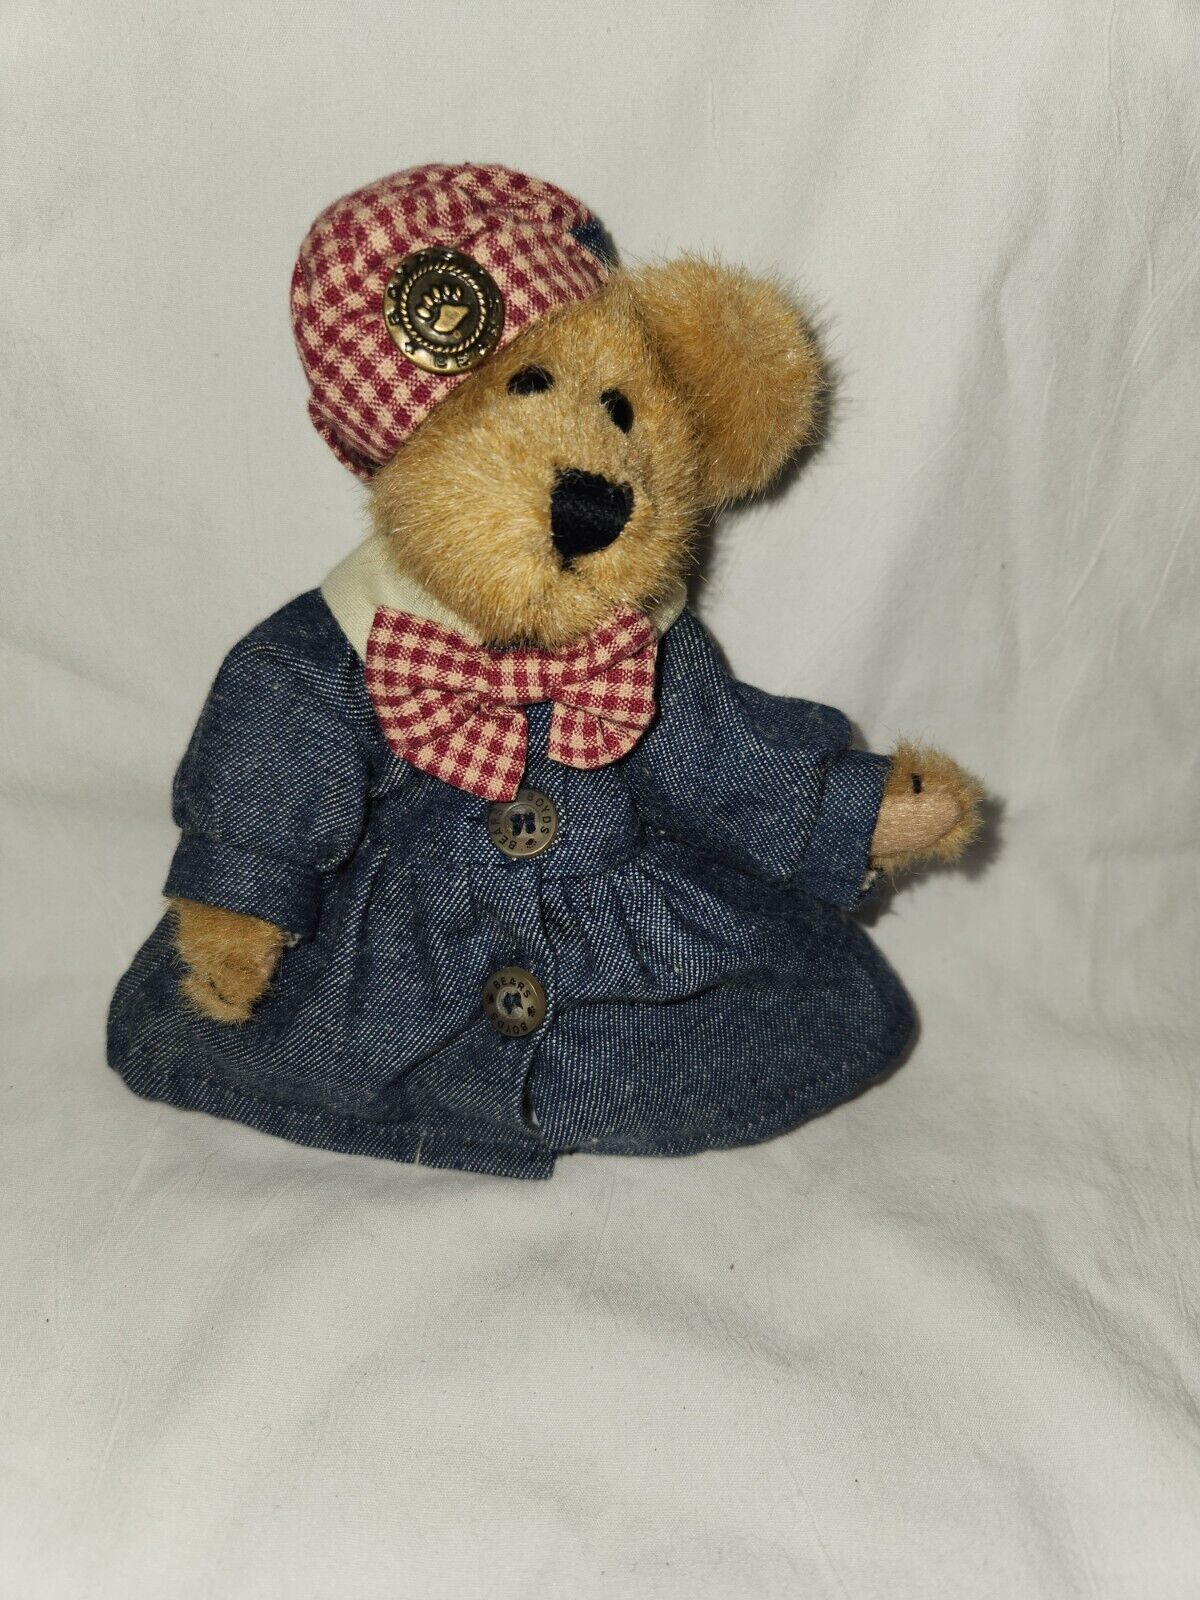 Boyds Bears Country Dress Stuffed Plush Jointed 6 Inch